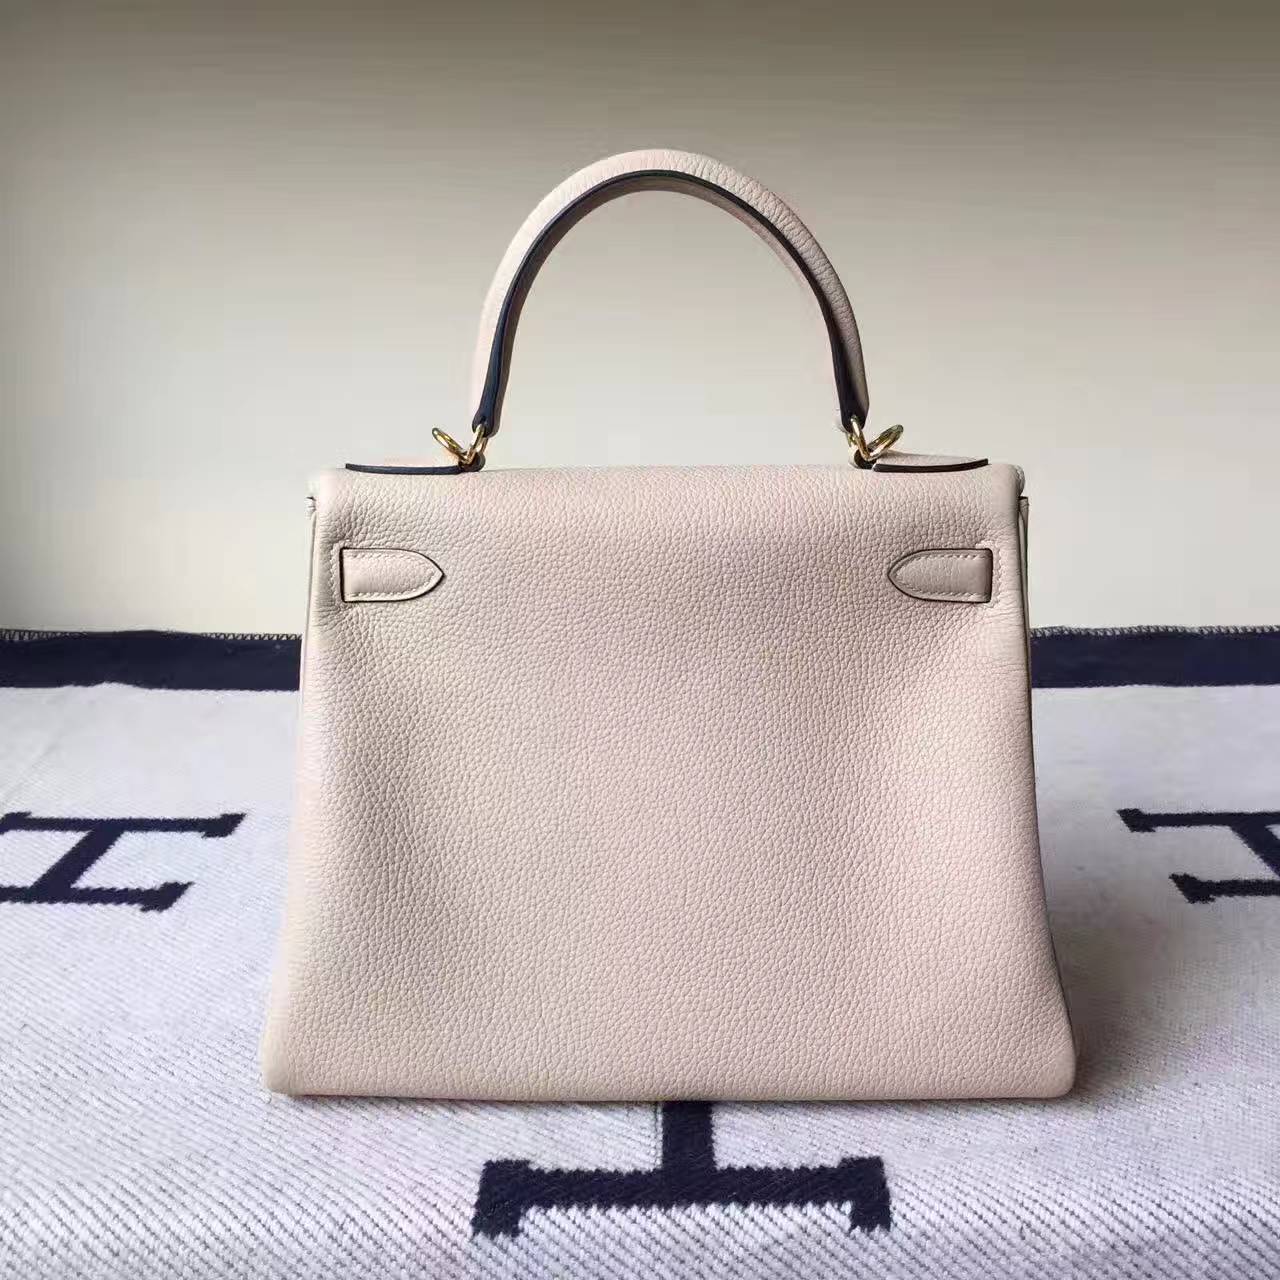 Wholesale Hermes S2 Trench Grey Togo Leather Kelly Bag 28CM